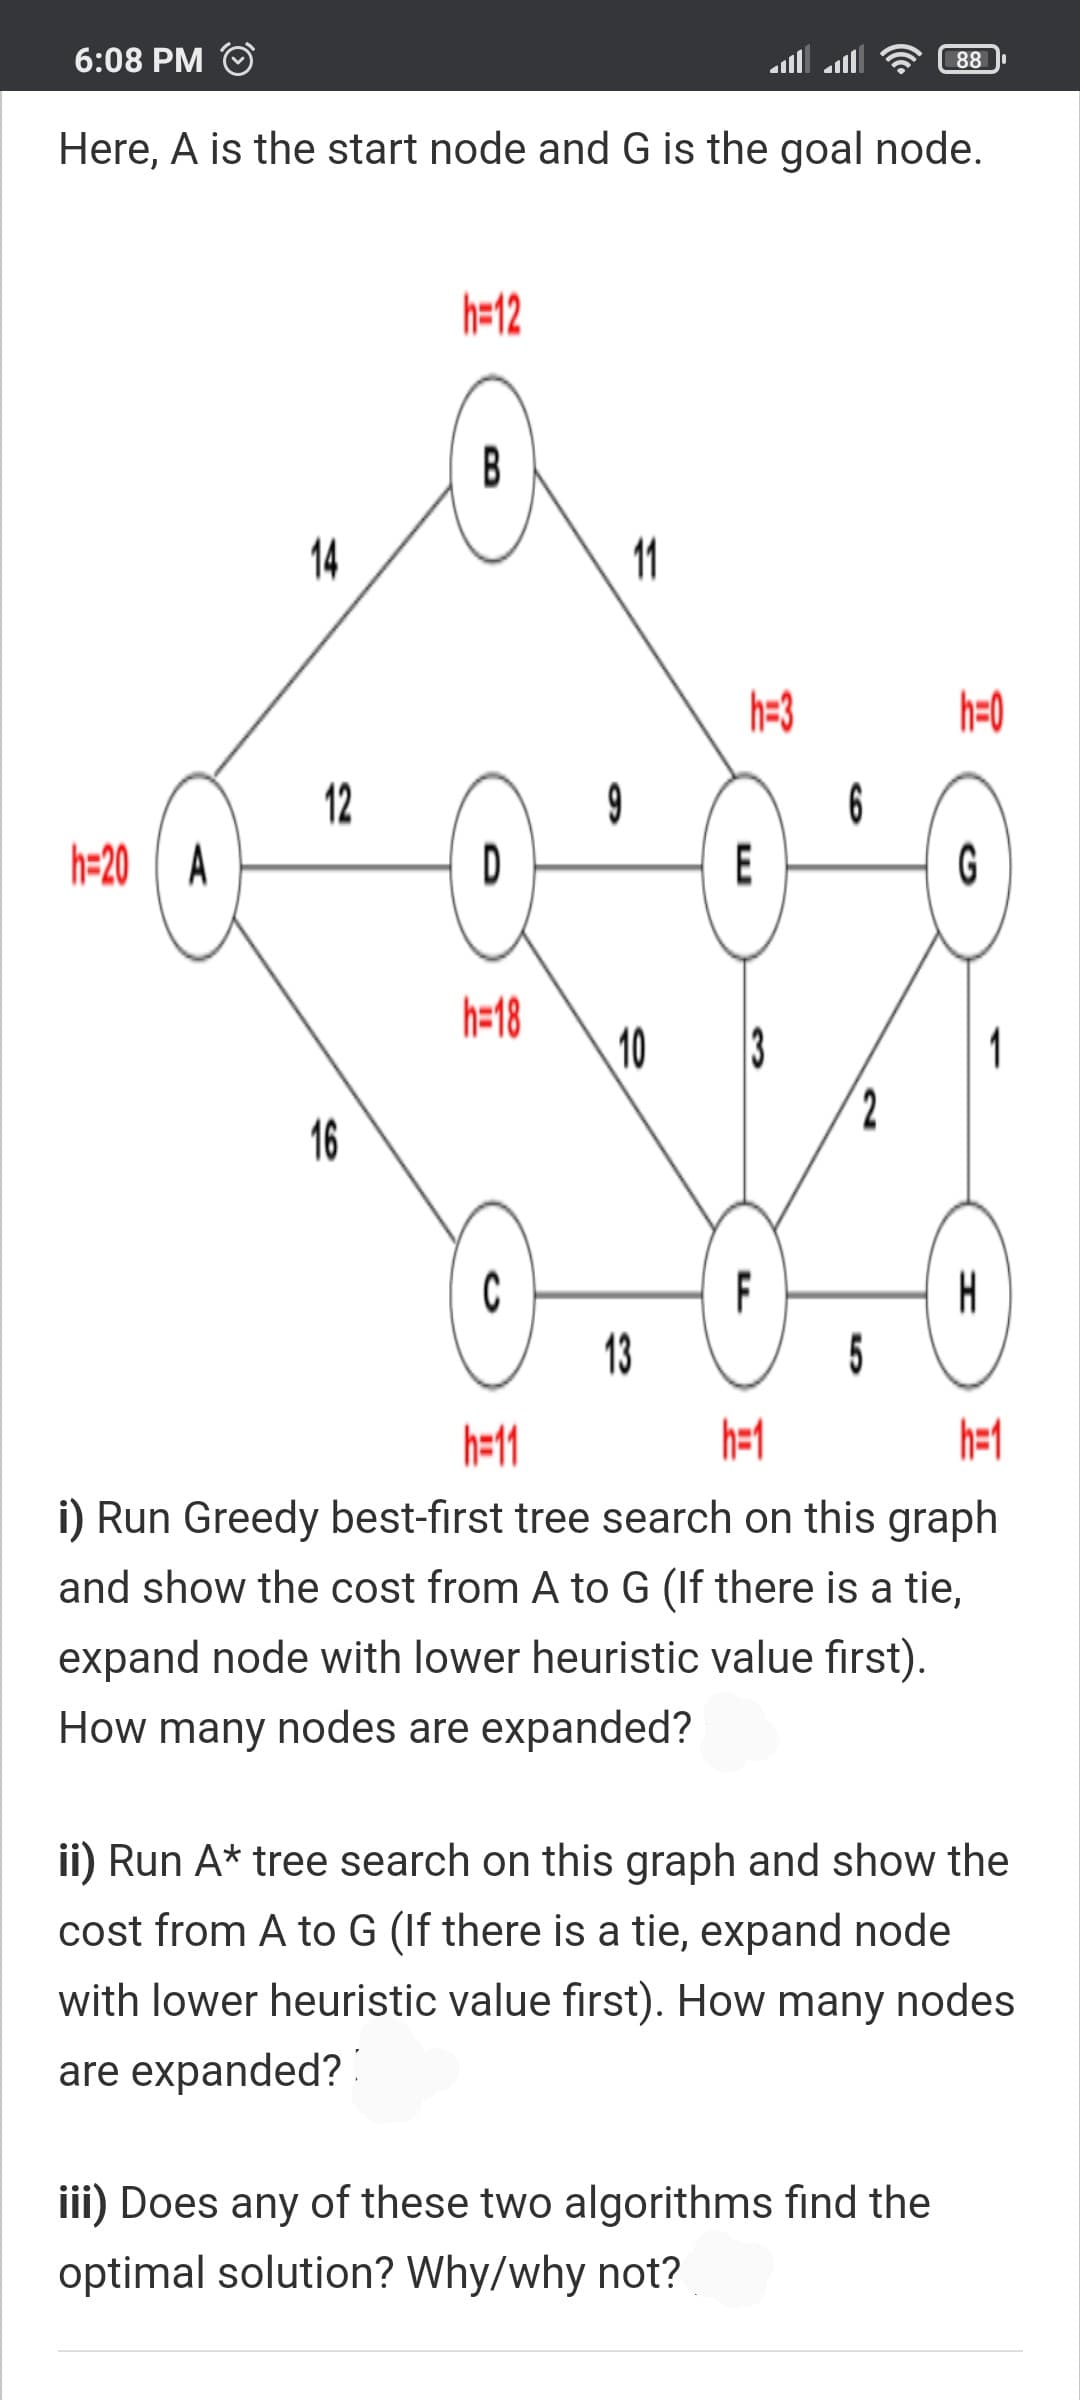 6:08 PM
88
Here, A is the start node and G is the goal node.
h=12
B
14
11
h=3
h=0
12
9
D
6
h=20 A
E
G
h=18
10
2,
16
C
13
H
5
F
h=11
h=1
i) Run Greedy best-first tree search on this graph
and show the cost from A to G (If there is a tie,
expand node with lower heuristic value first).
How many nodes are expanded?
ii) Run A* tree search on this graph and show the
cost from A to G (If there is a tie, expand node
with lower heuristic value first). How many nodes
are expanded?!
iii) Does any of these two algorithms find the
optimal solution? Why/why not?
